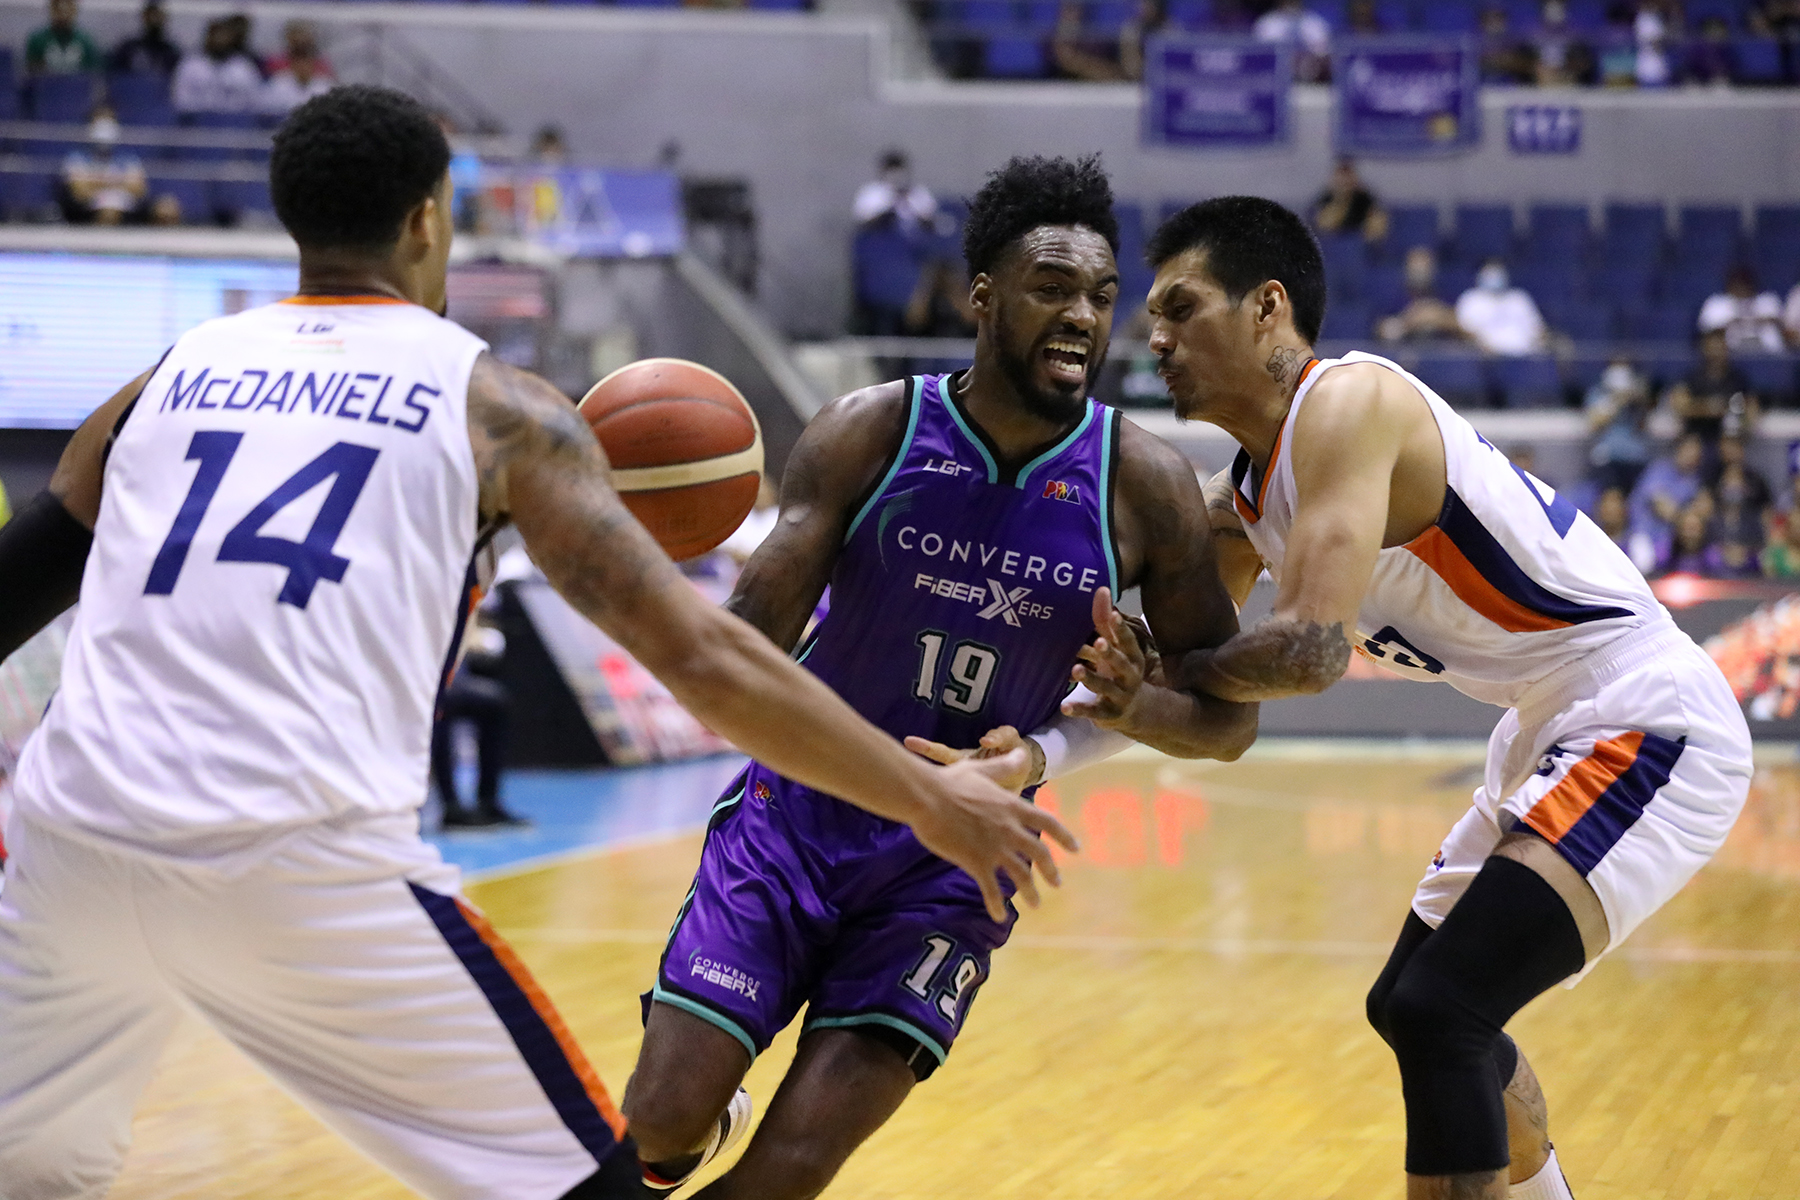 Two Meralco players try to stop Converge import Jamaal Franklin. –PBA IMAGES